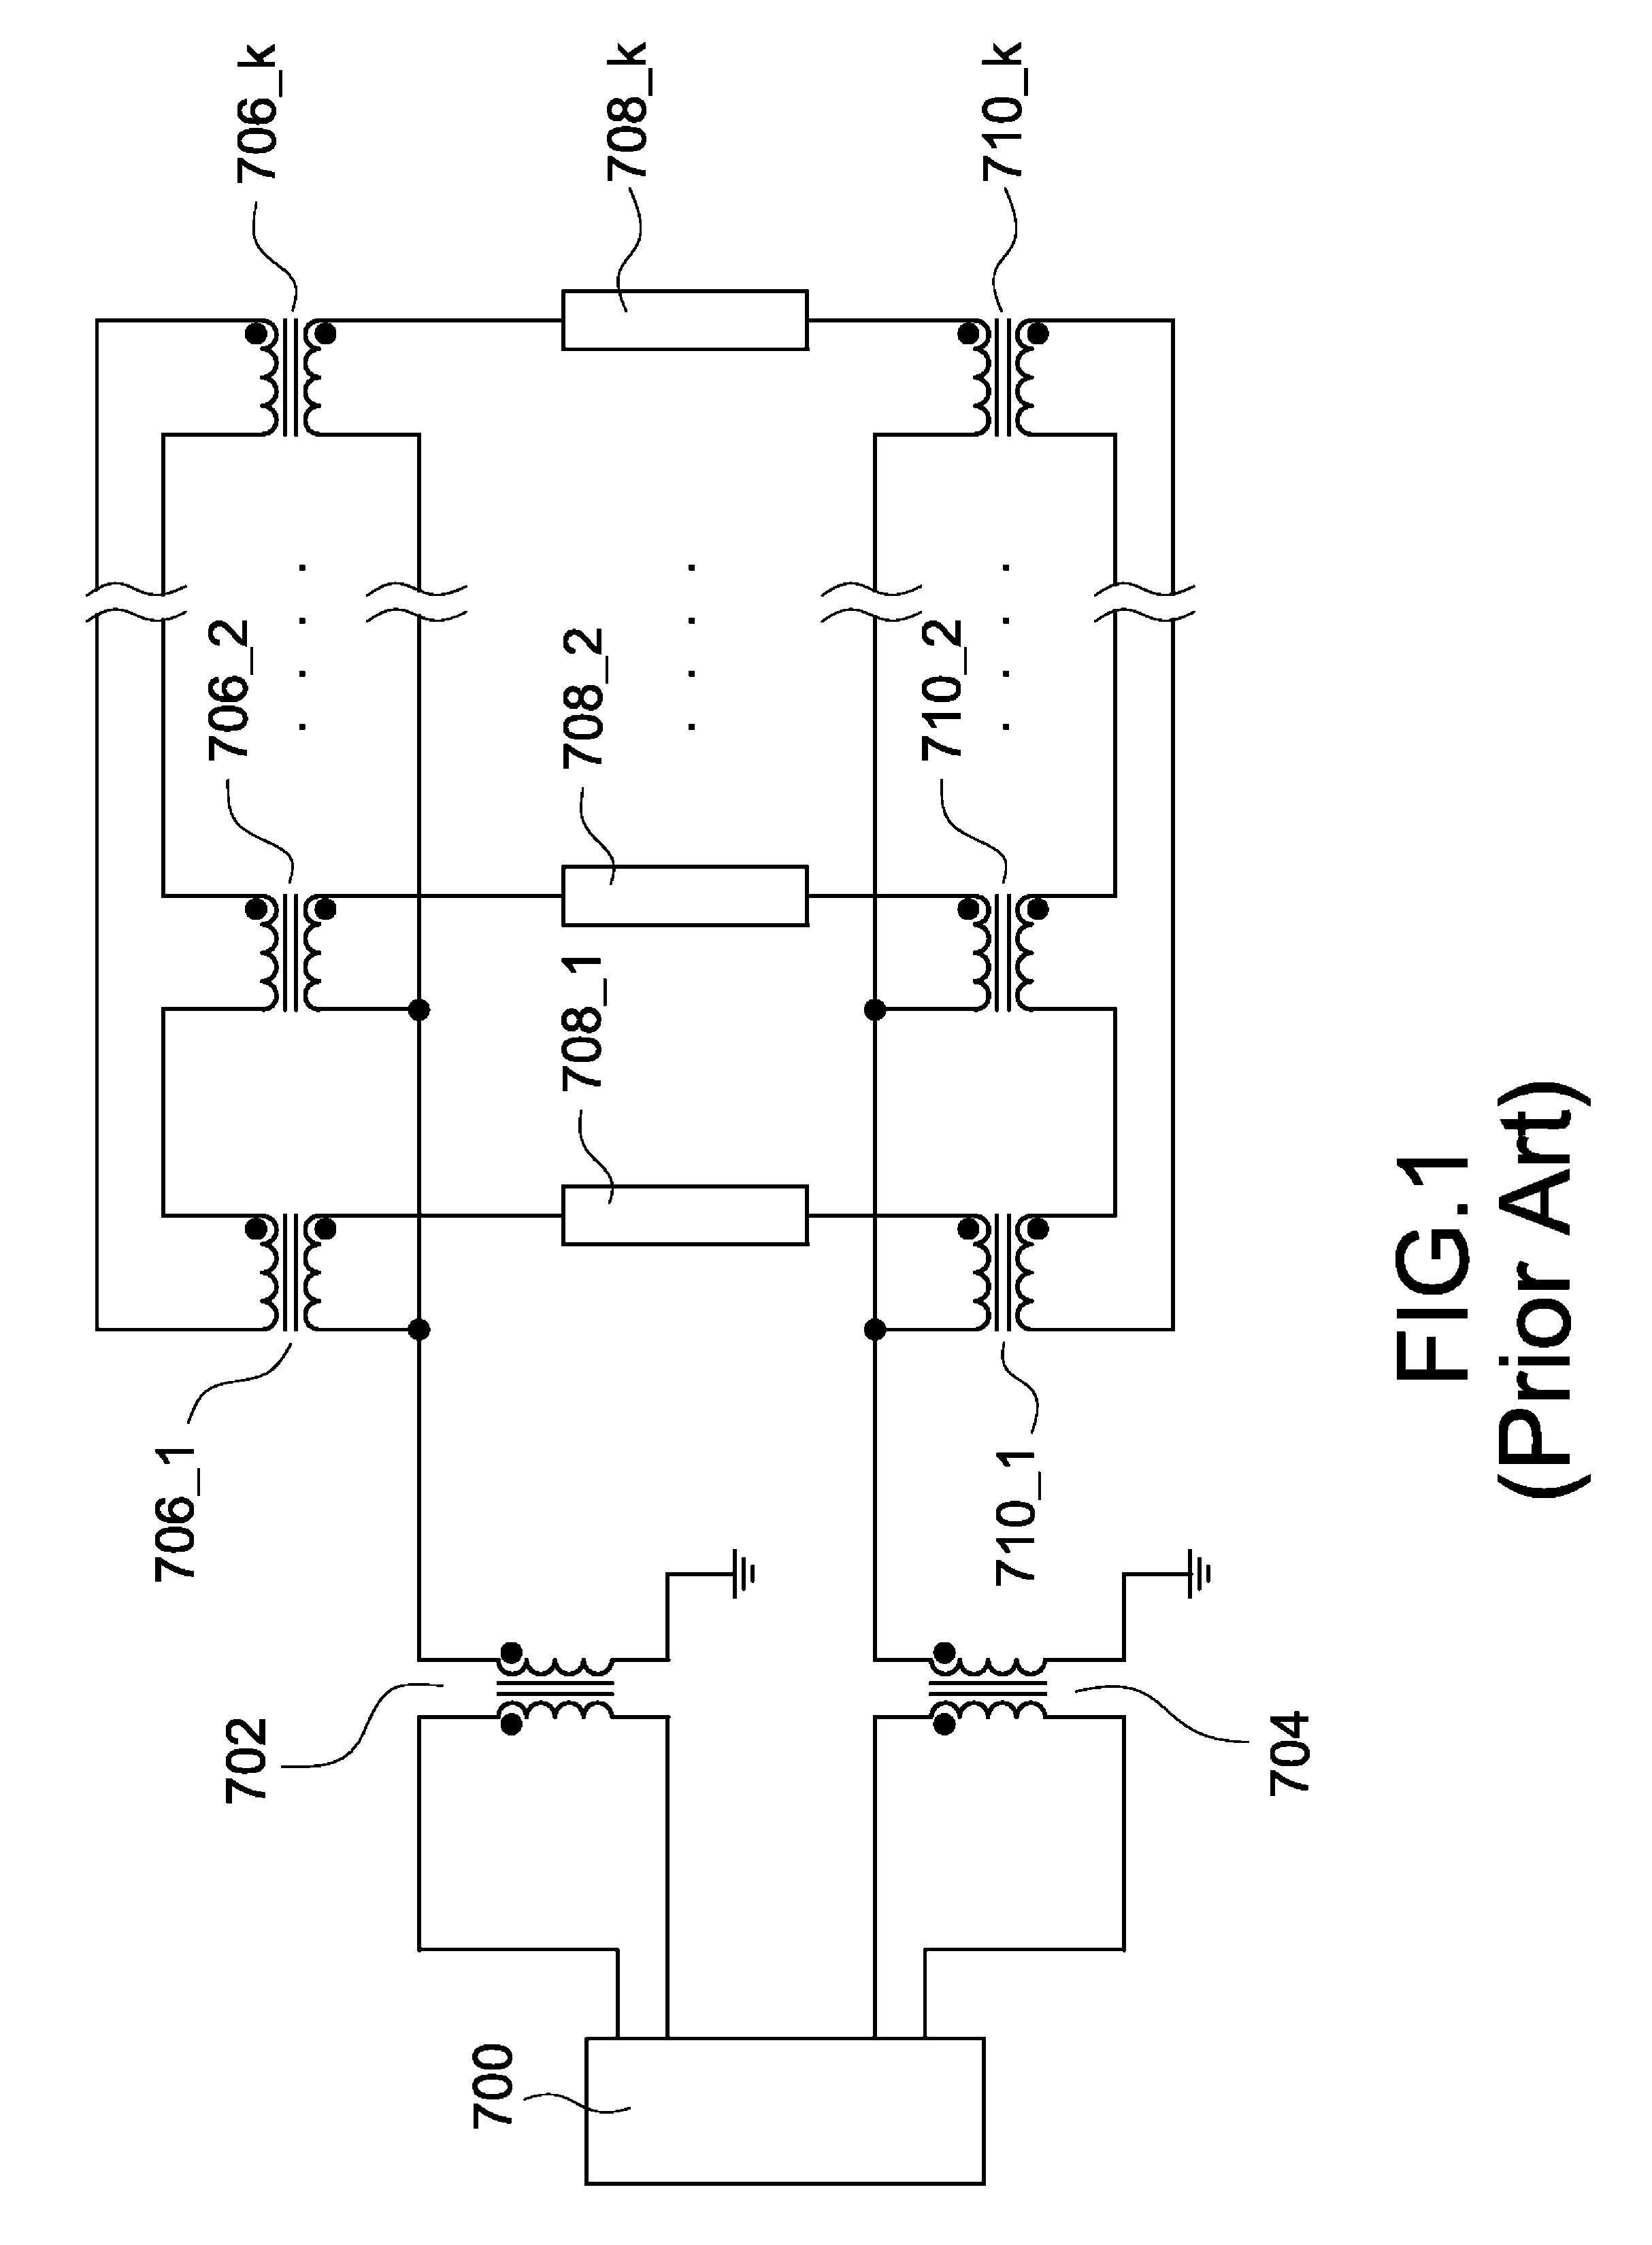 Two-stage balancer for multi-lamp backlight